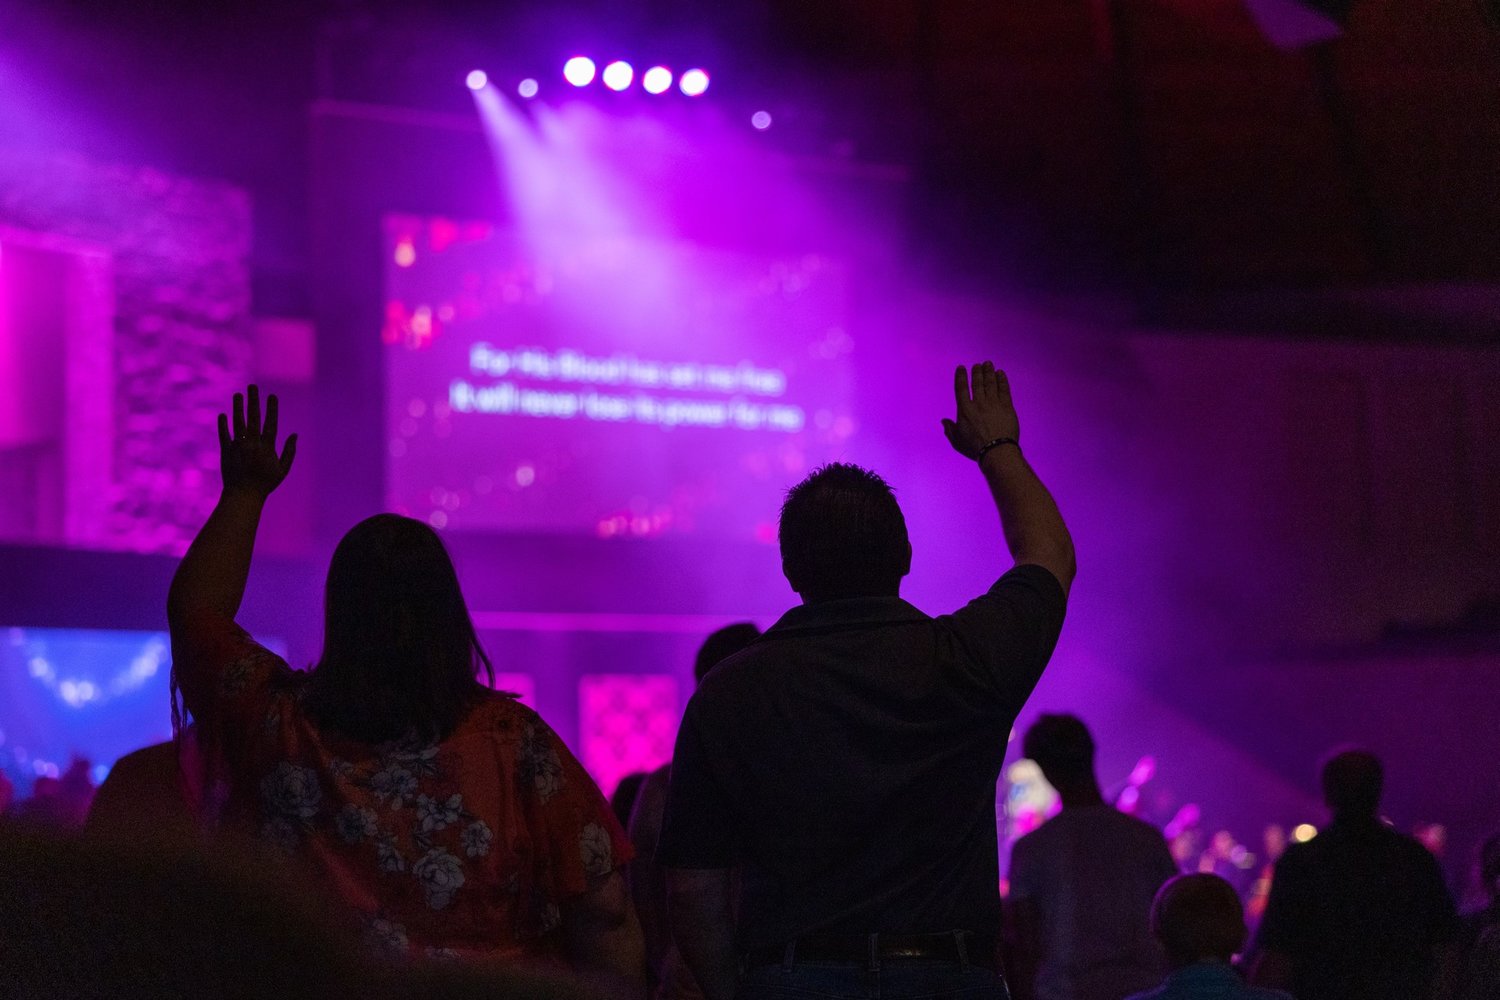 Worshippers praise the Lord during a service at the Fayetteville church.